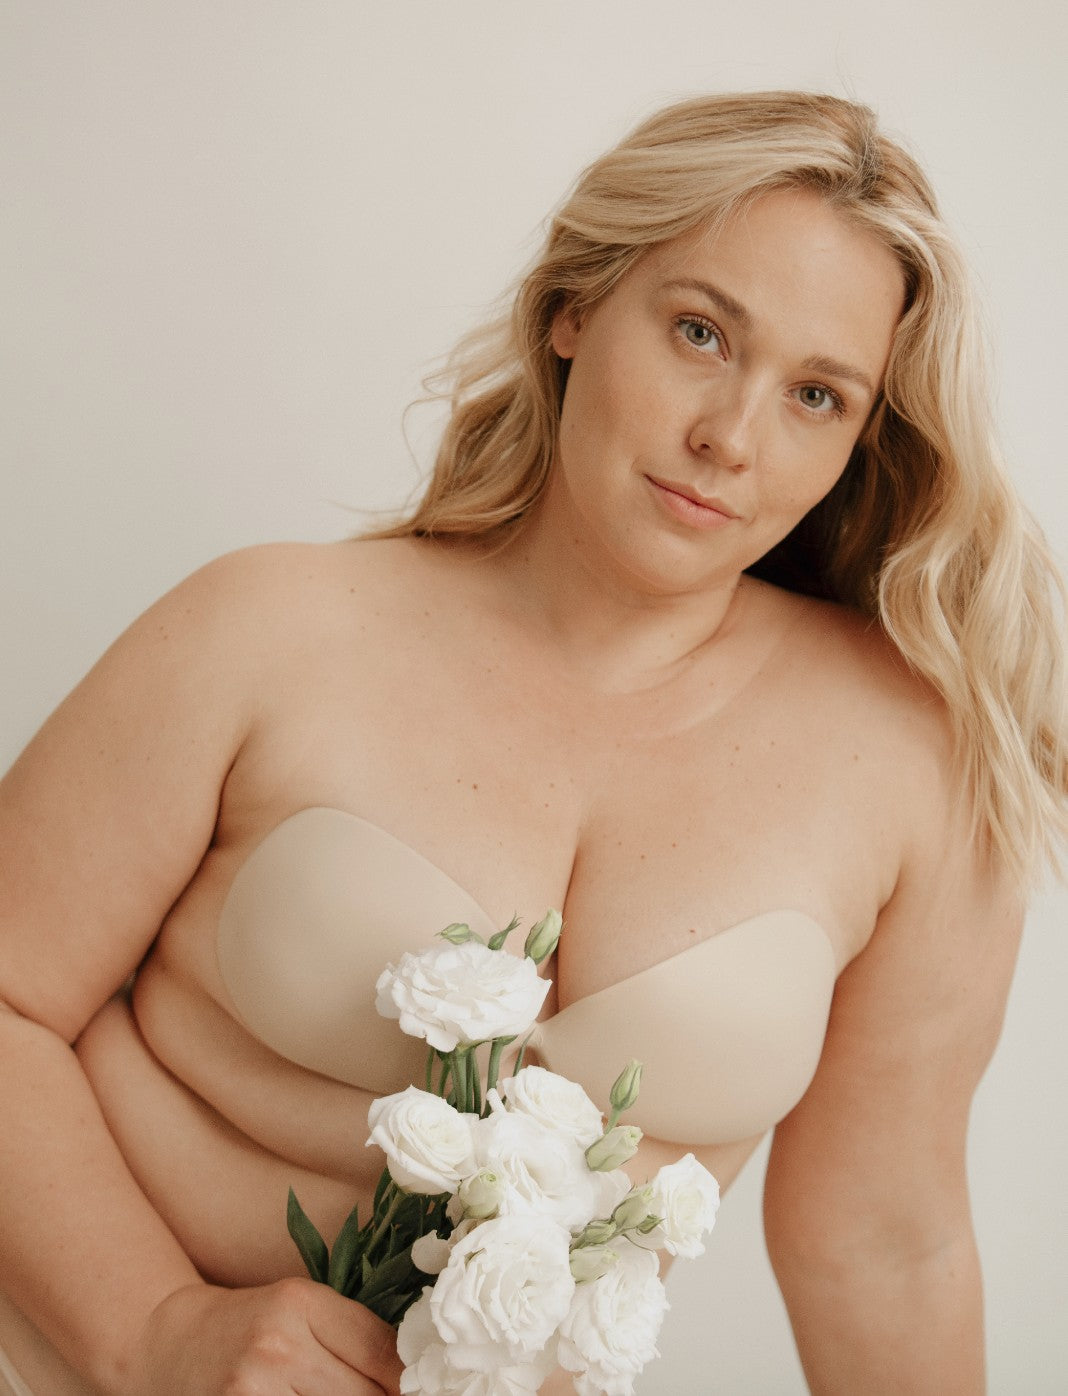 How strong is Gatherall bra? This strong! Made with medical grade adhesive  silicone strong yet gentle to you skin. Shop now before they sell out  again!